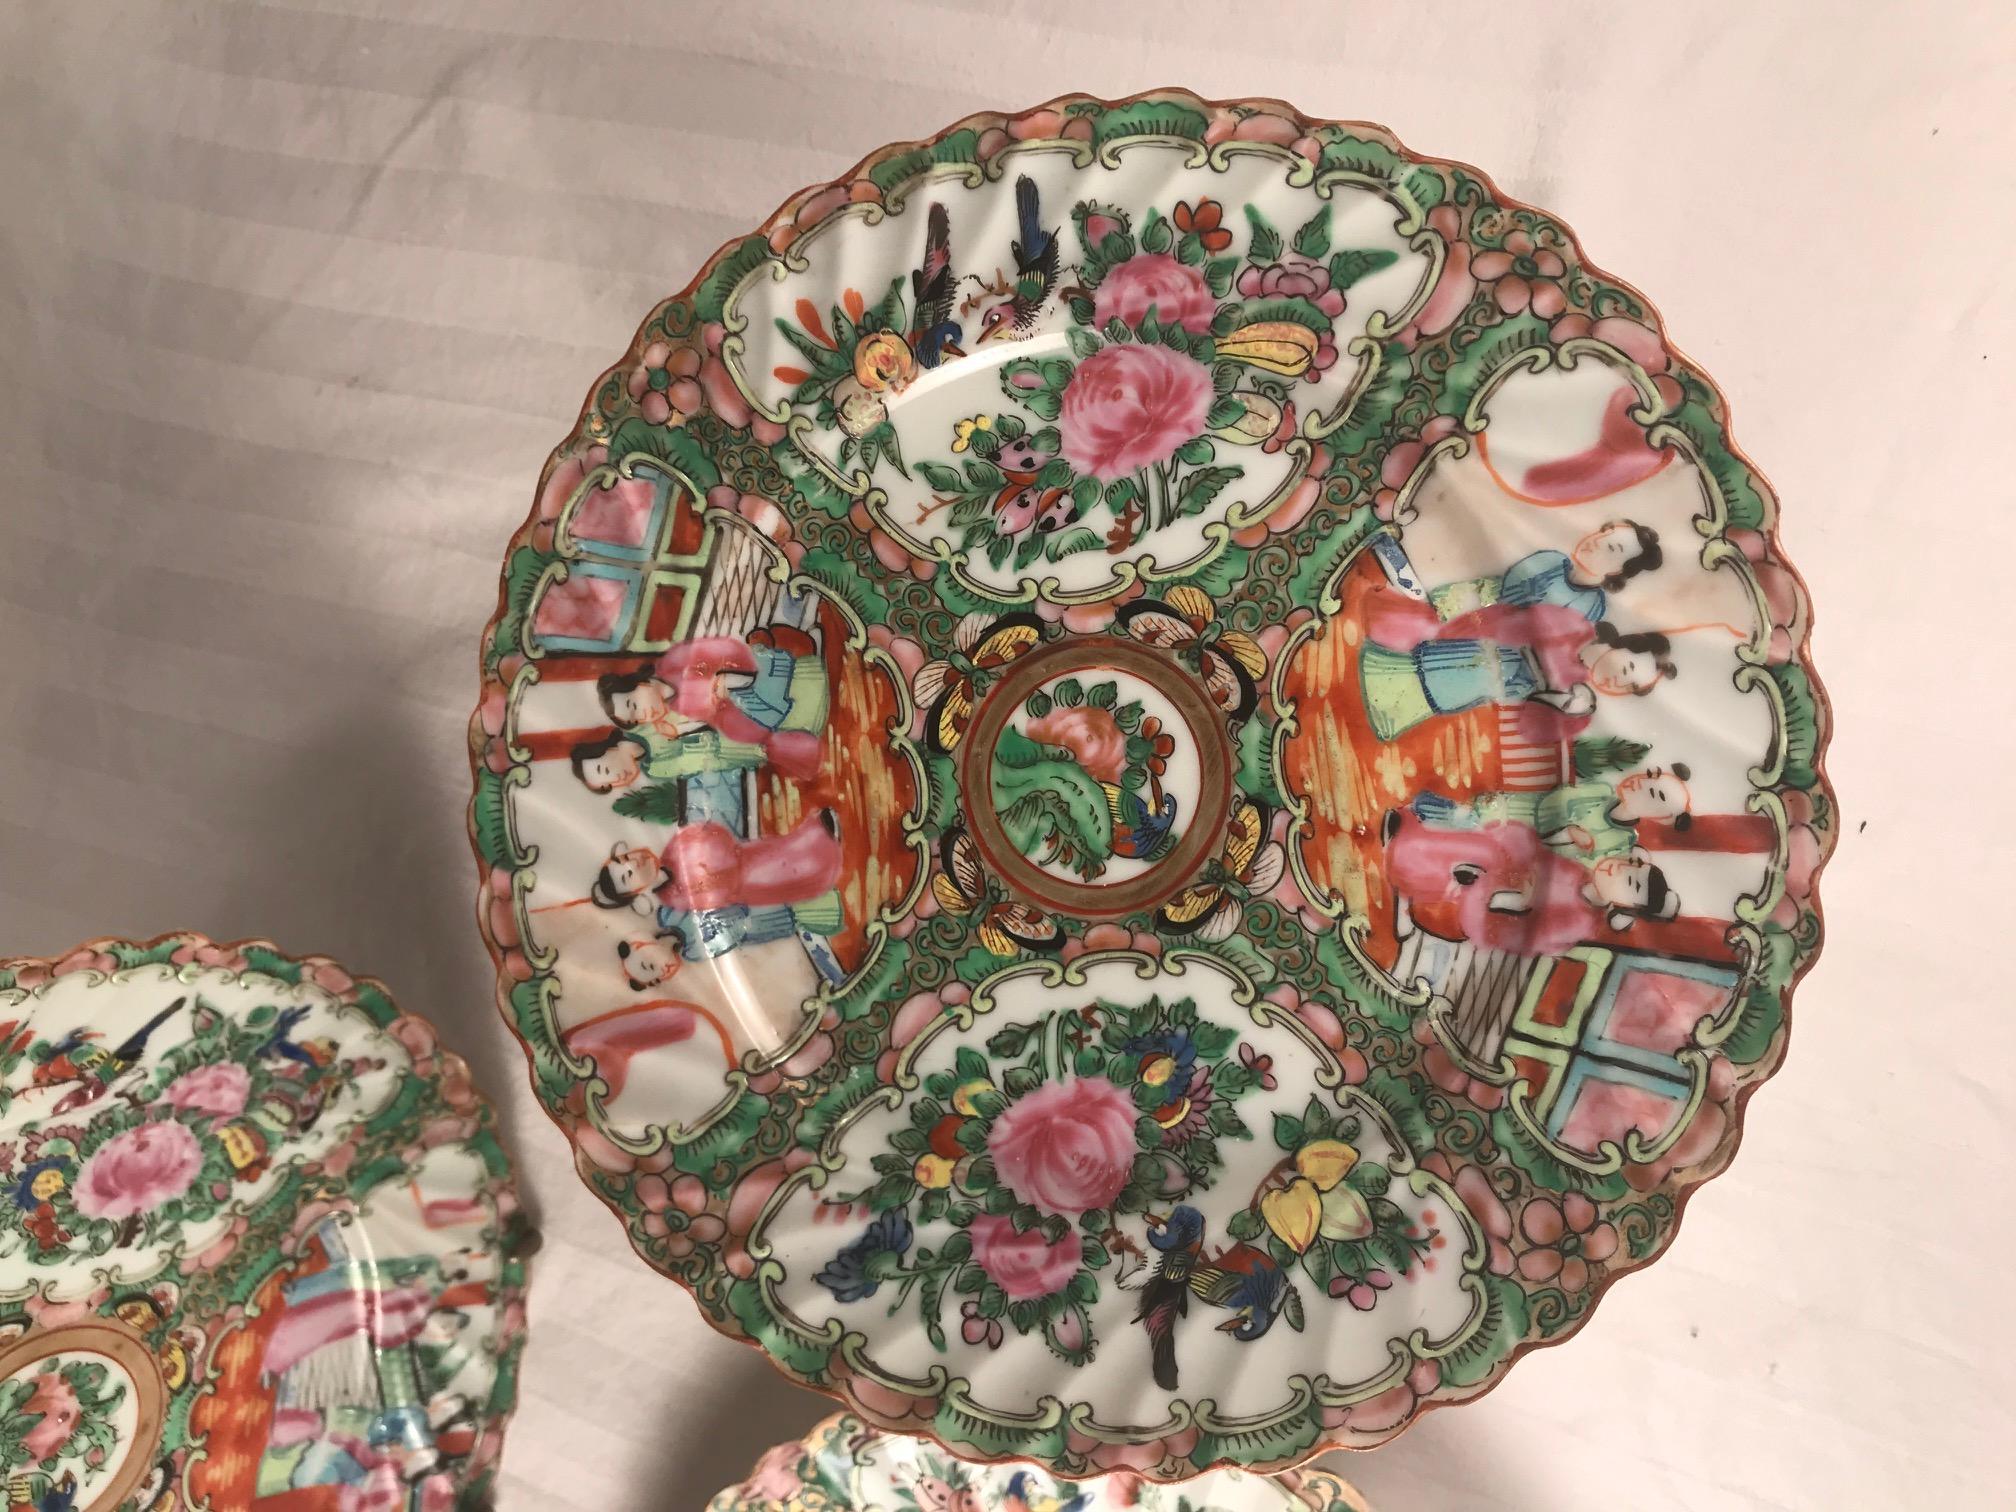 19th century Qing period, 12 Chinese Rose Medallion porcelain dinner plates

12 delicate antique eggshell dinner plates with scalloped rim. The 19th century plates are decorated with traditional rose medallion design of village scenes, florals and